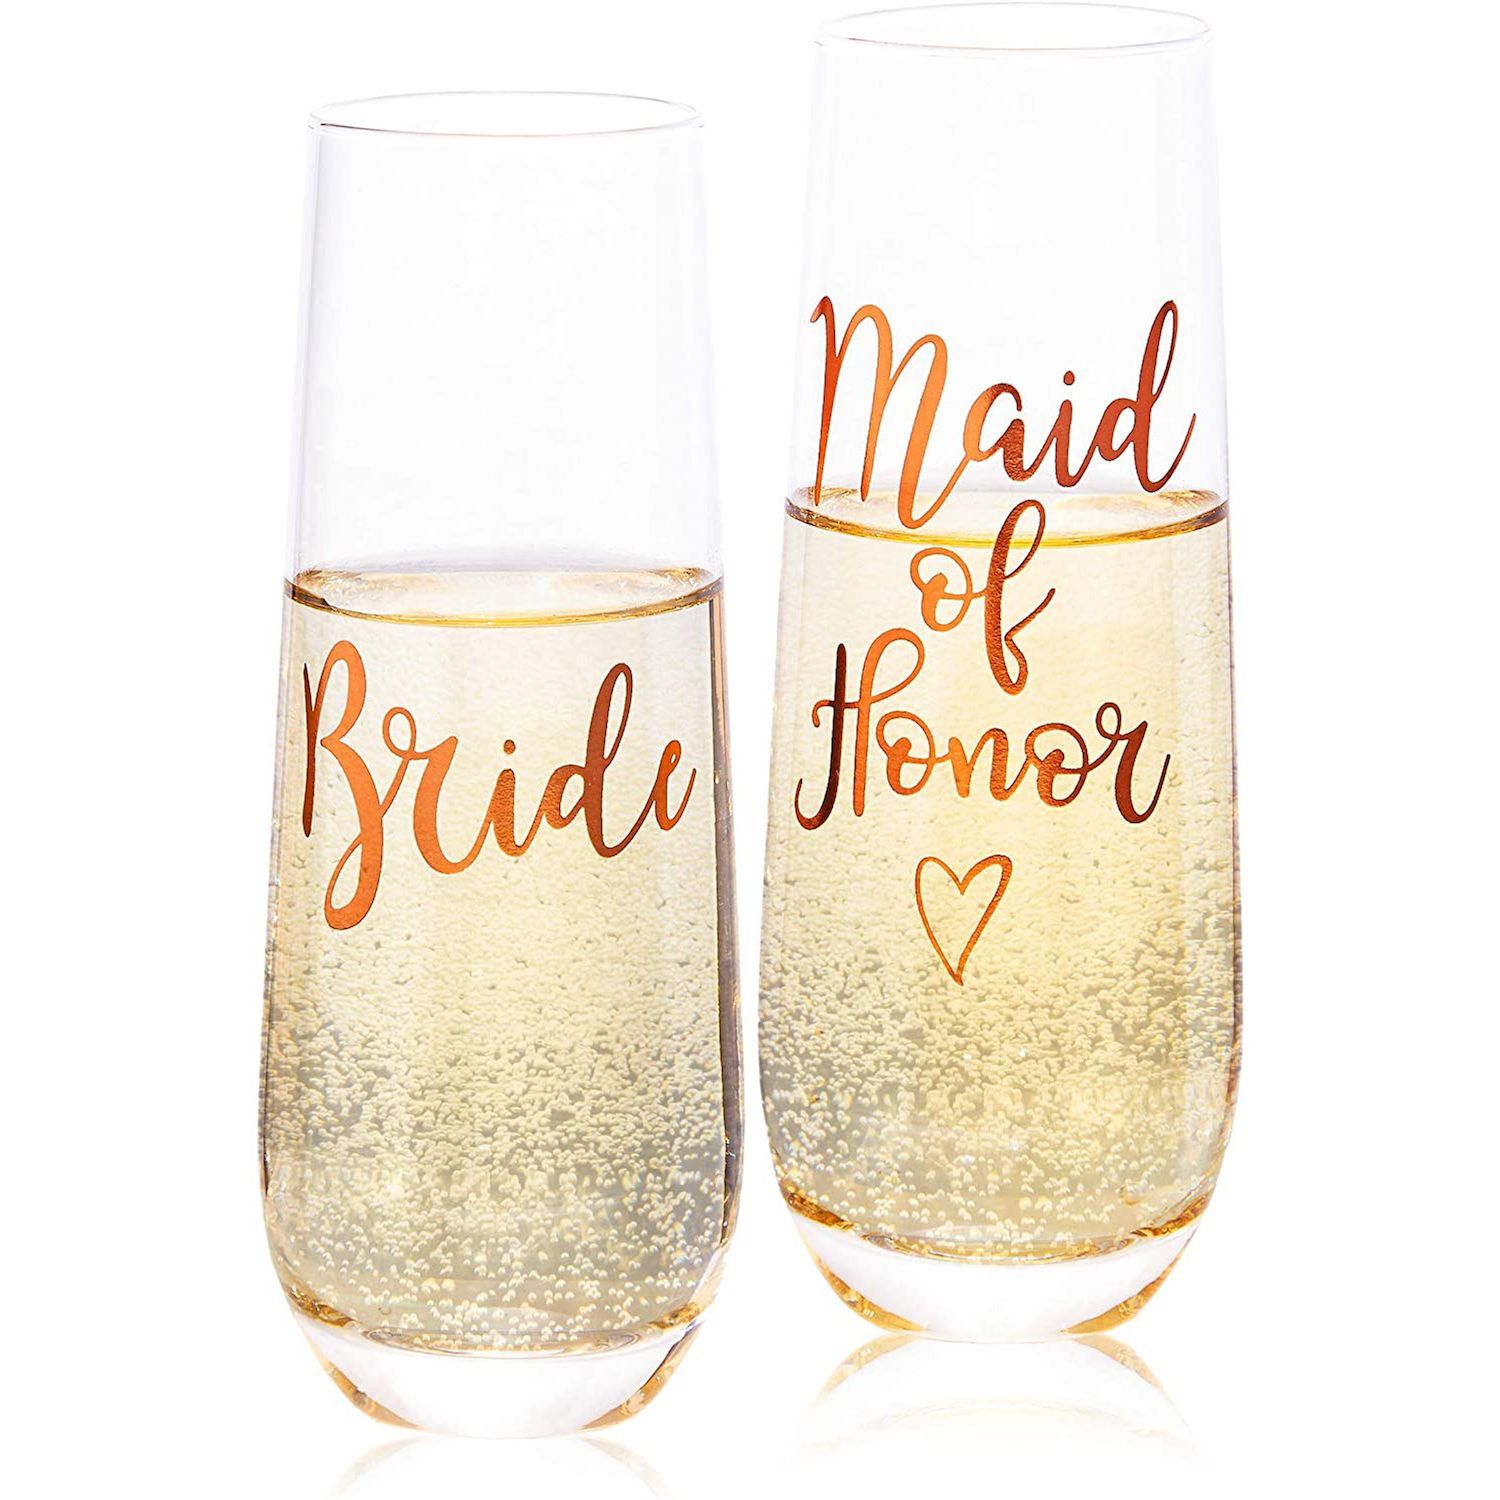 Bride and Groom Silicone Wine Cups by Silipint (14 oz. Wine Glasses) - Set  of Two